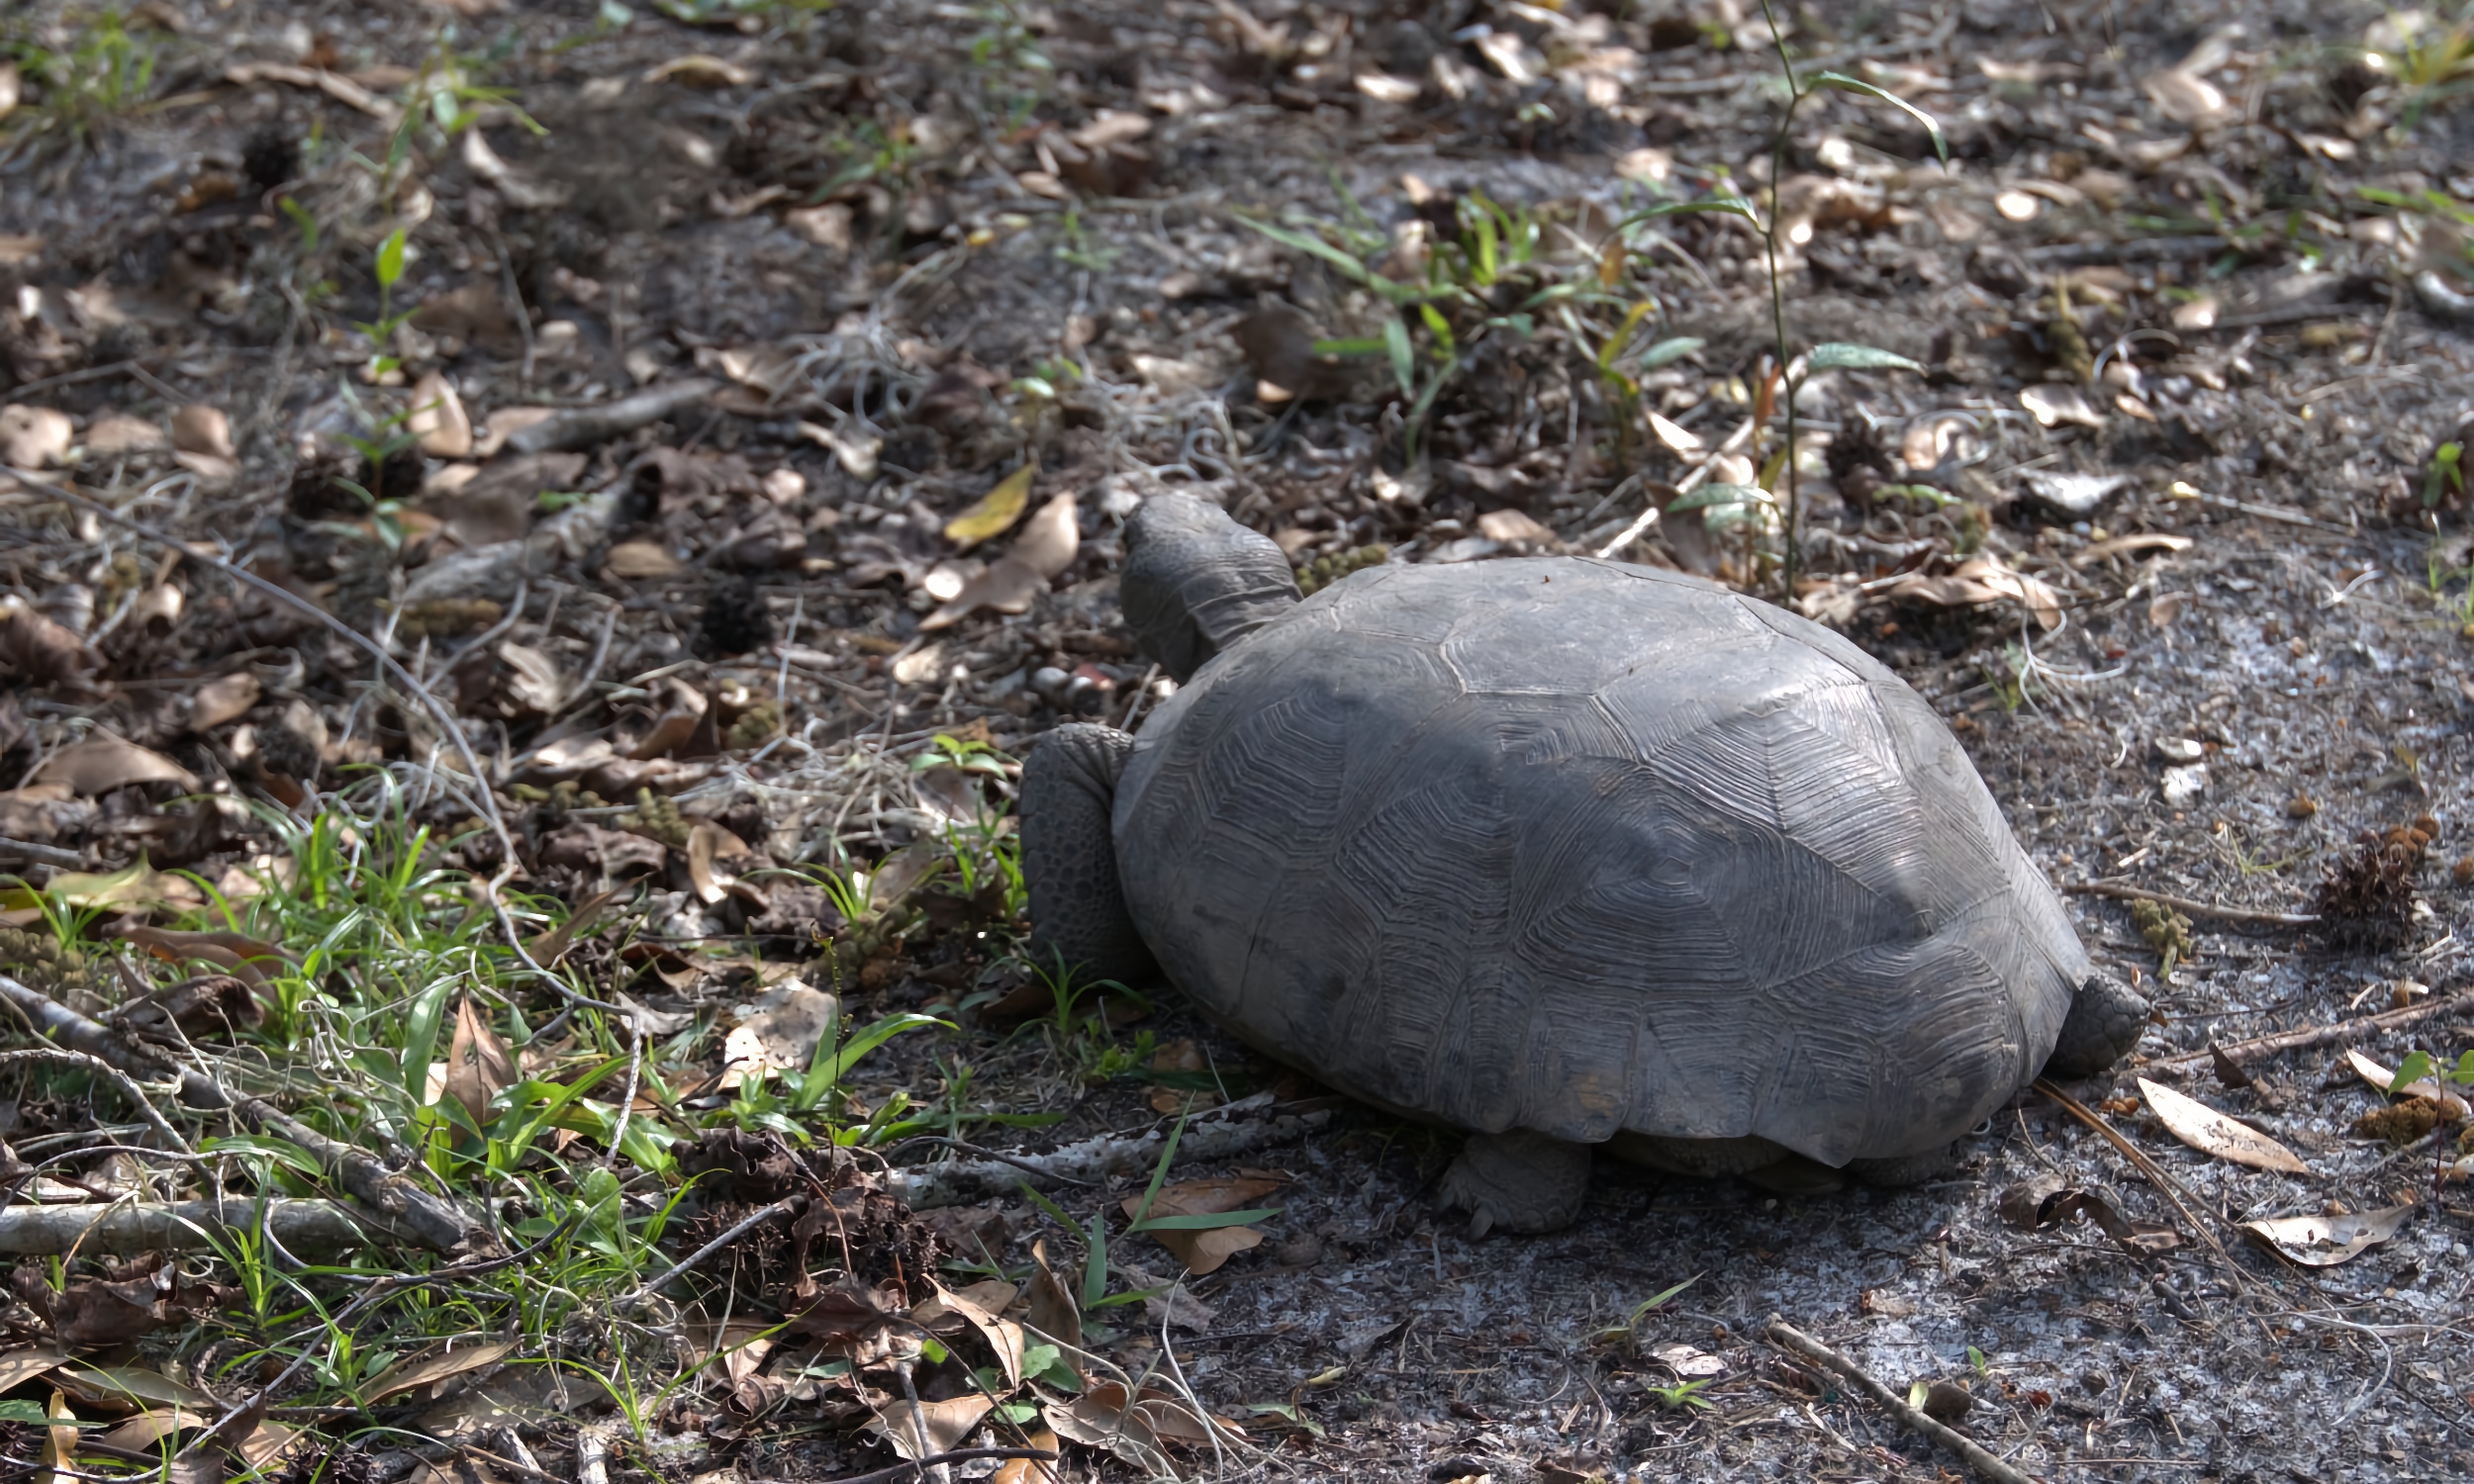 A gopher tortoise wanders the trail on the nature preserve in Hastings